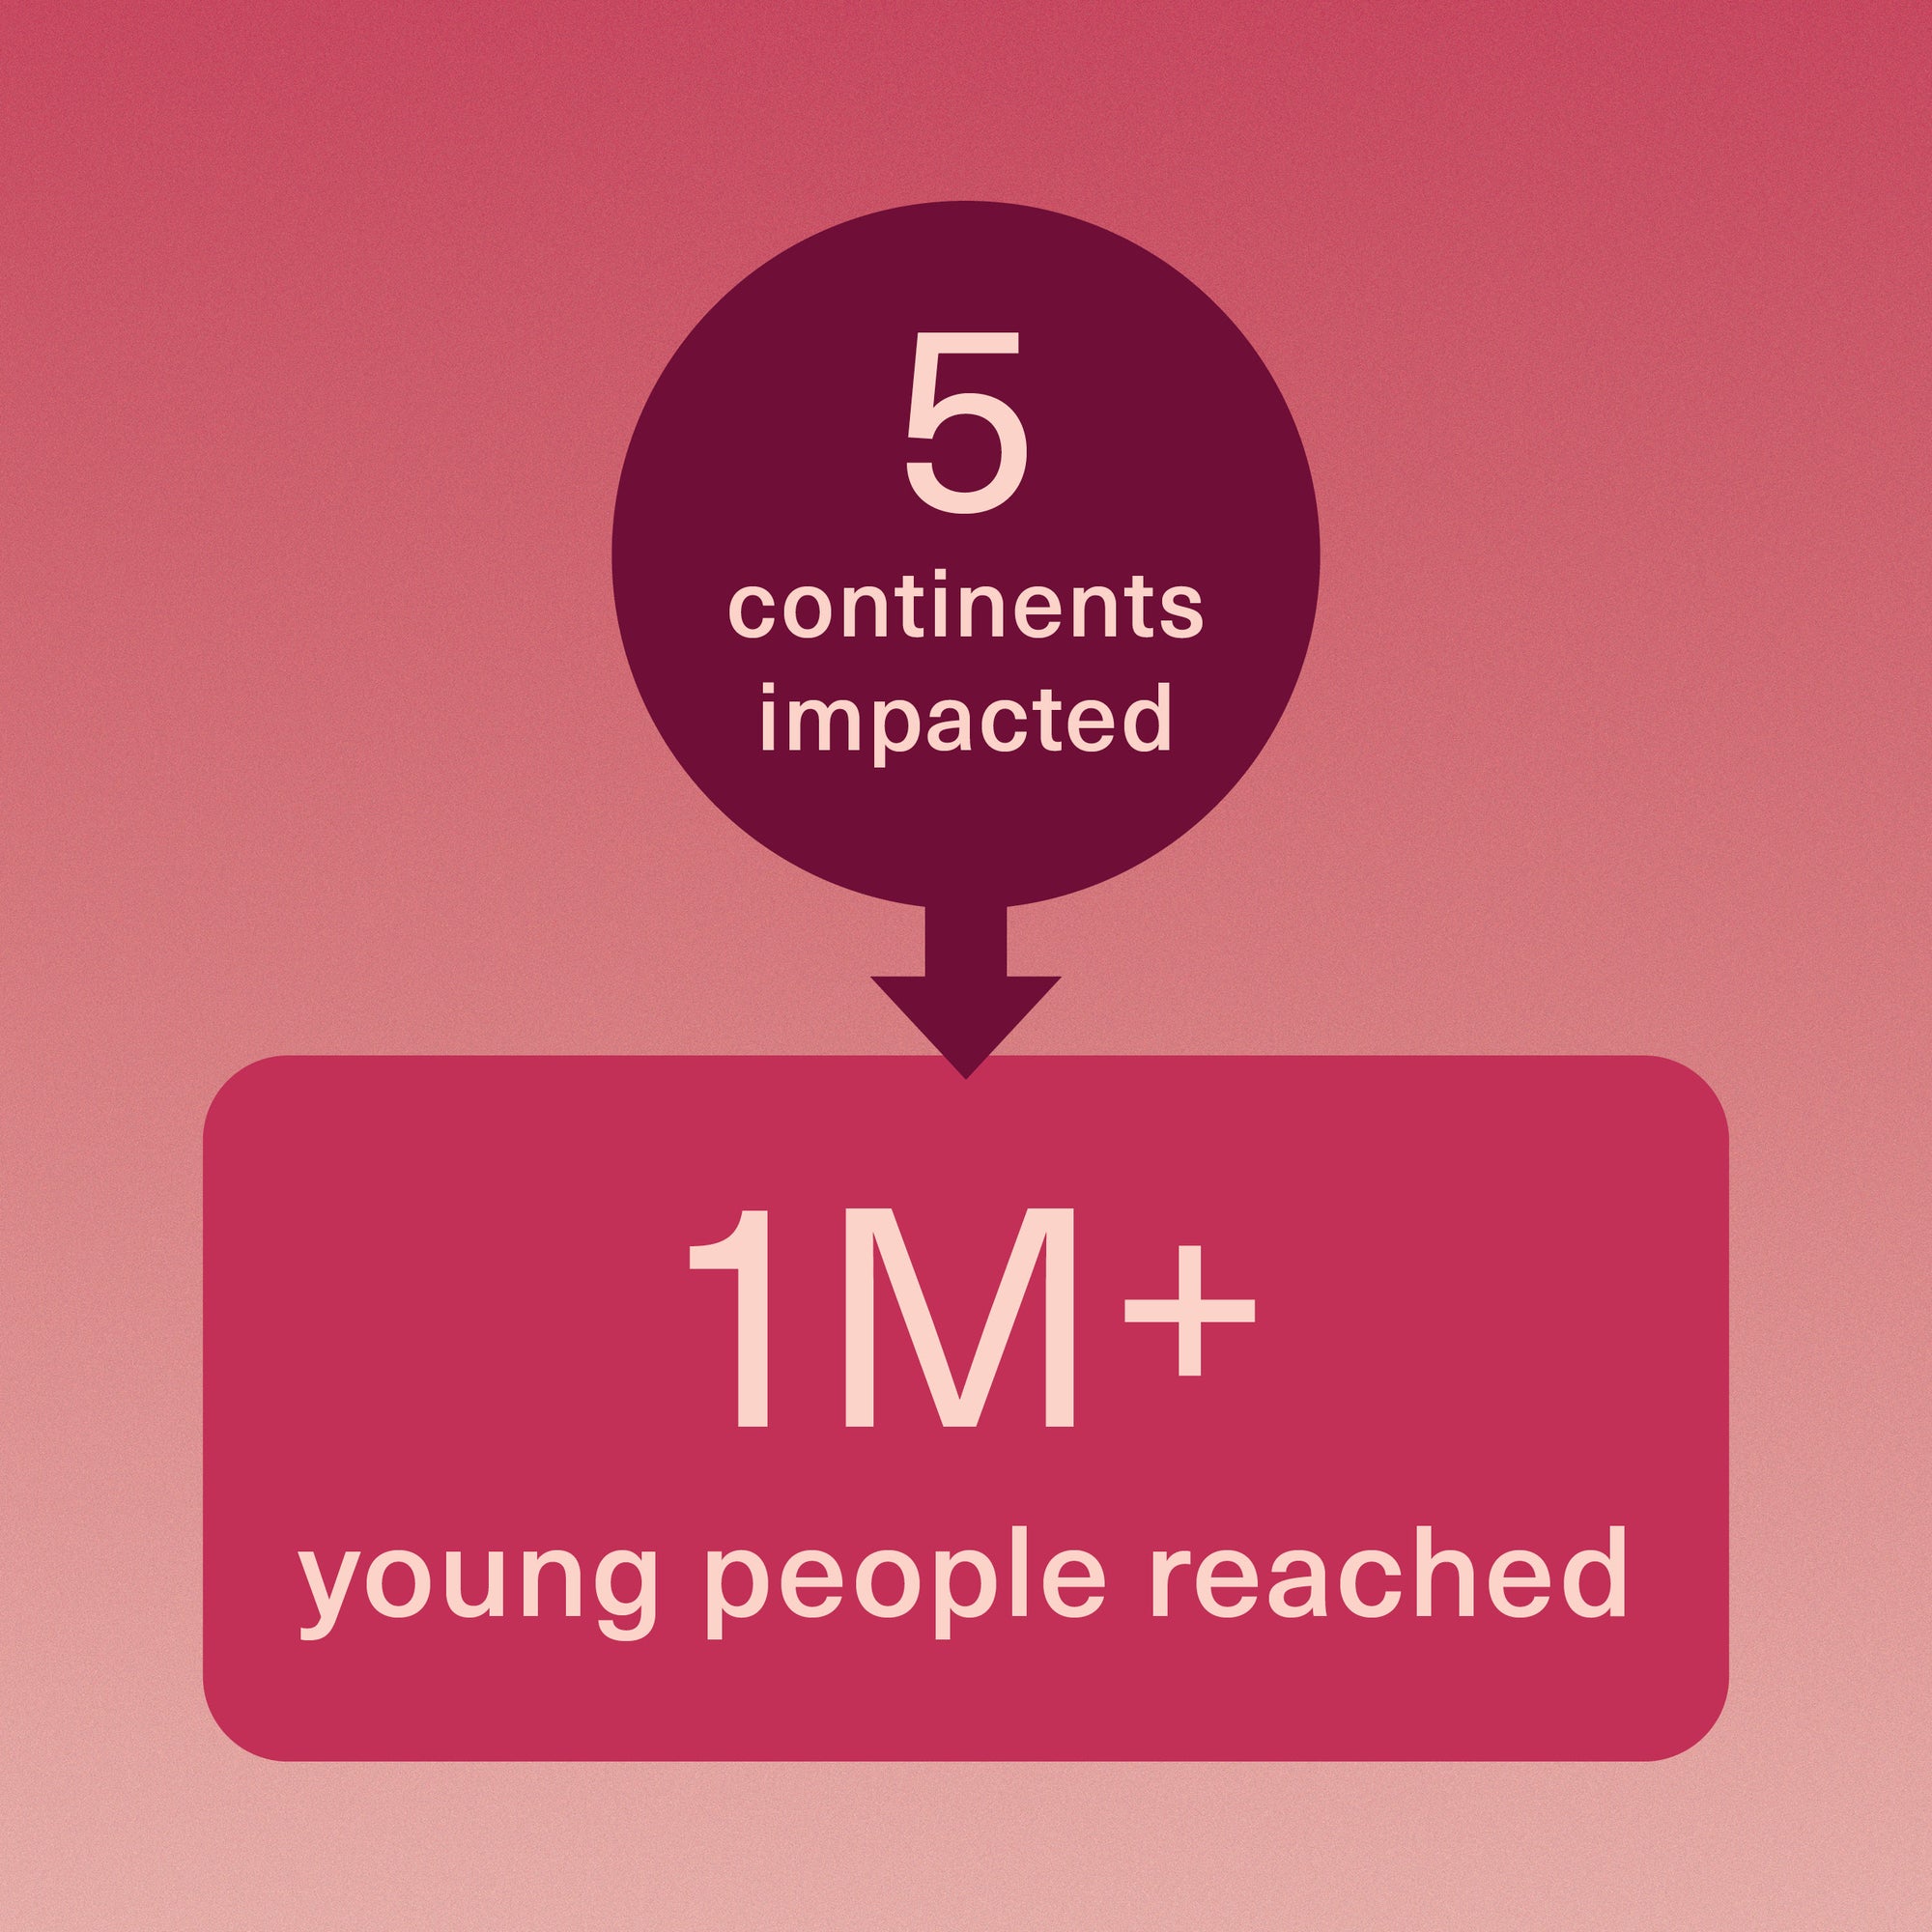 5 continents impacted & 1M young people reached